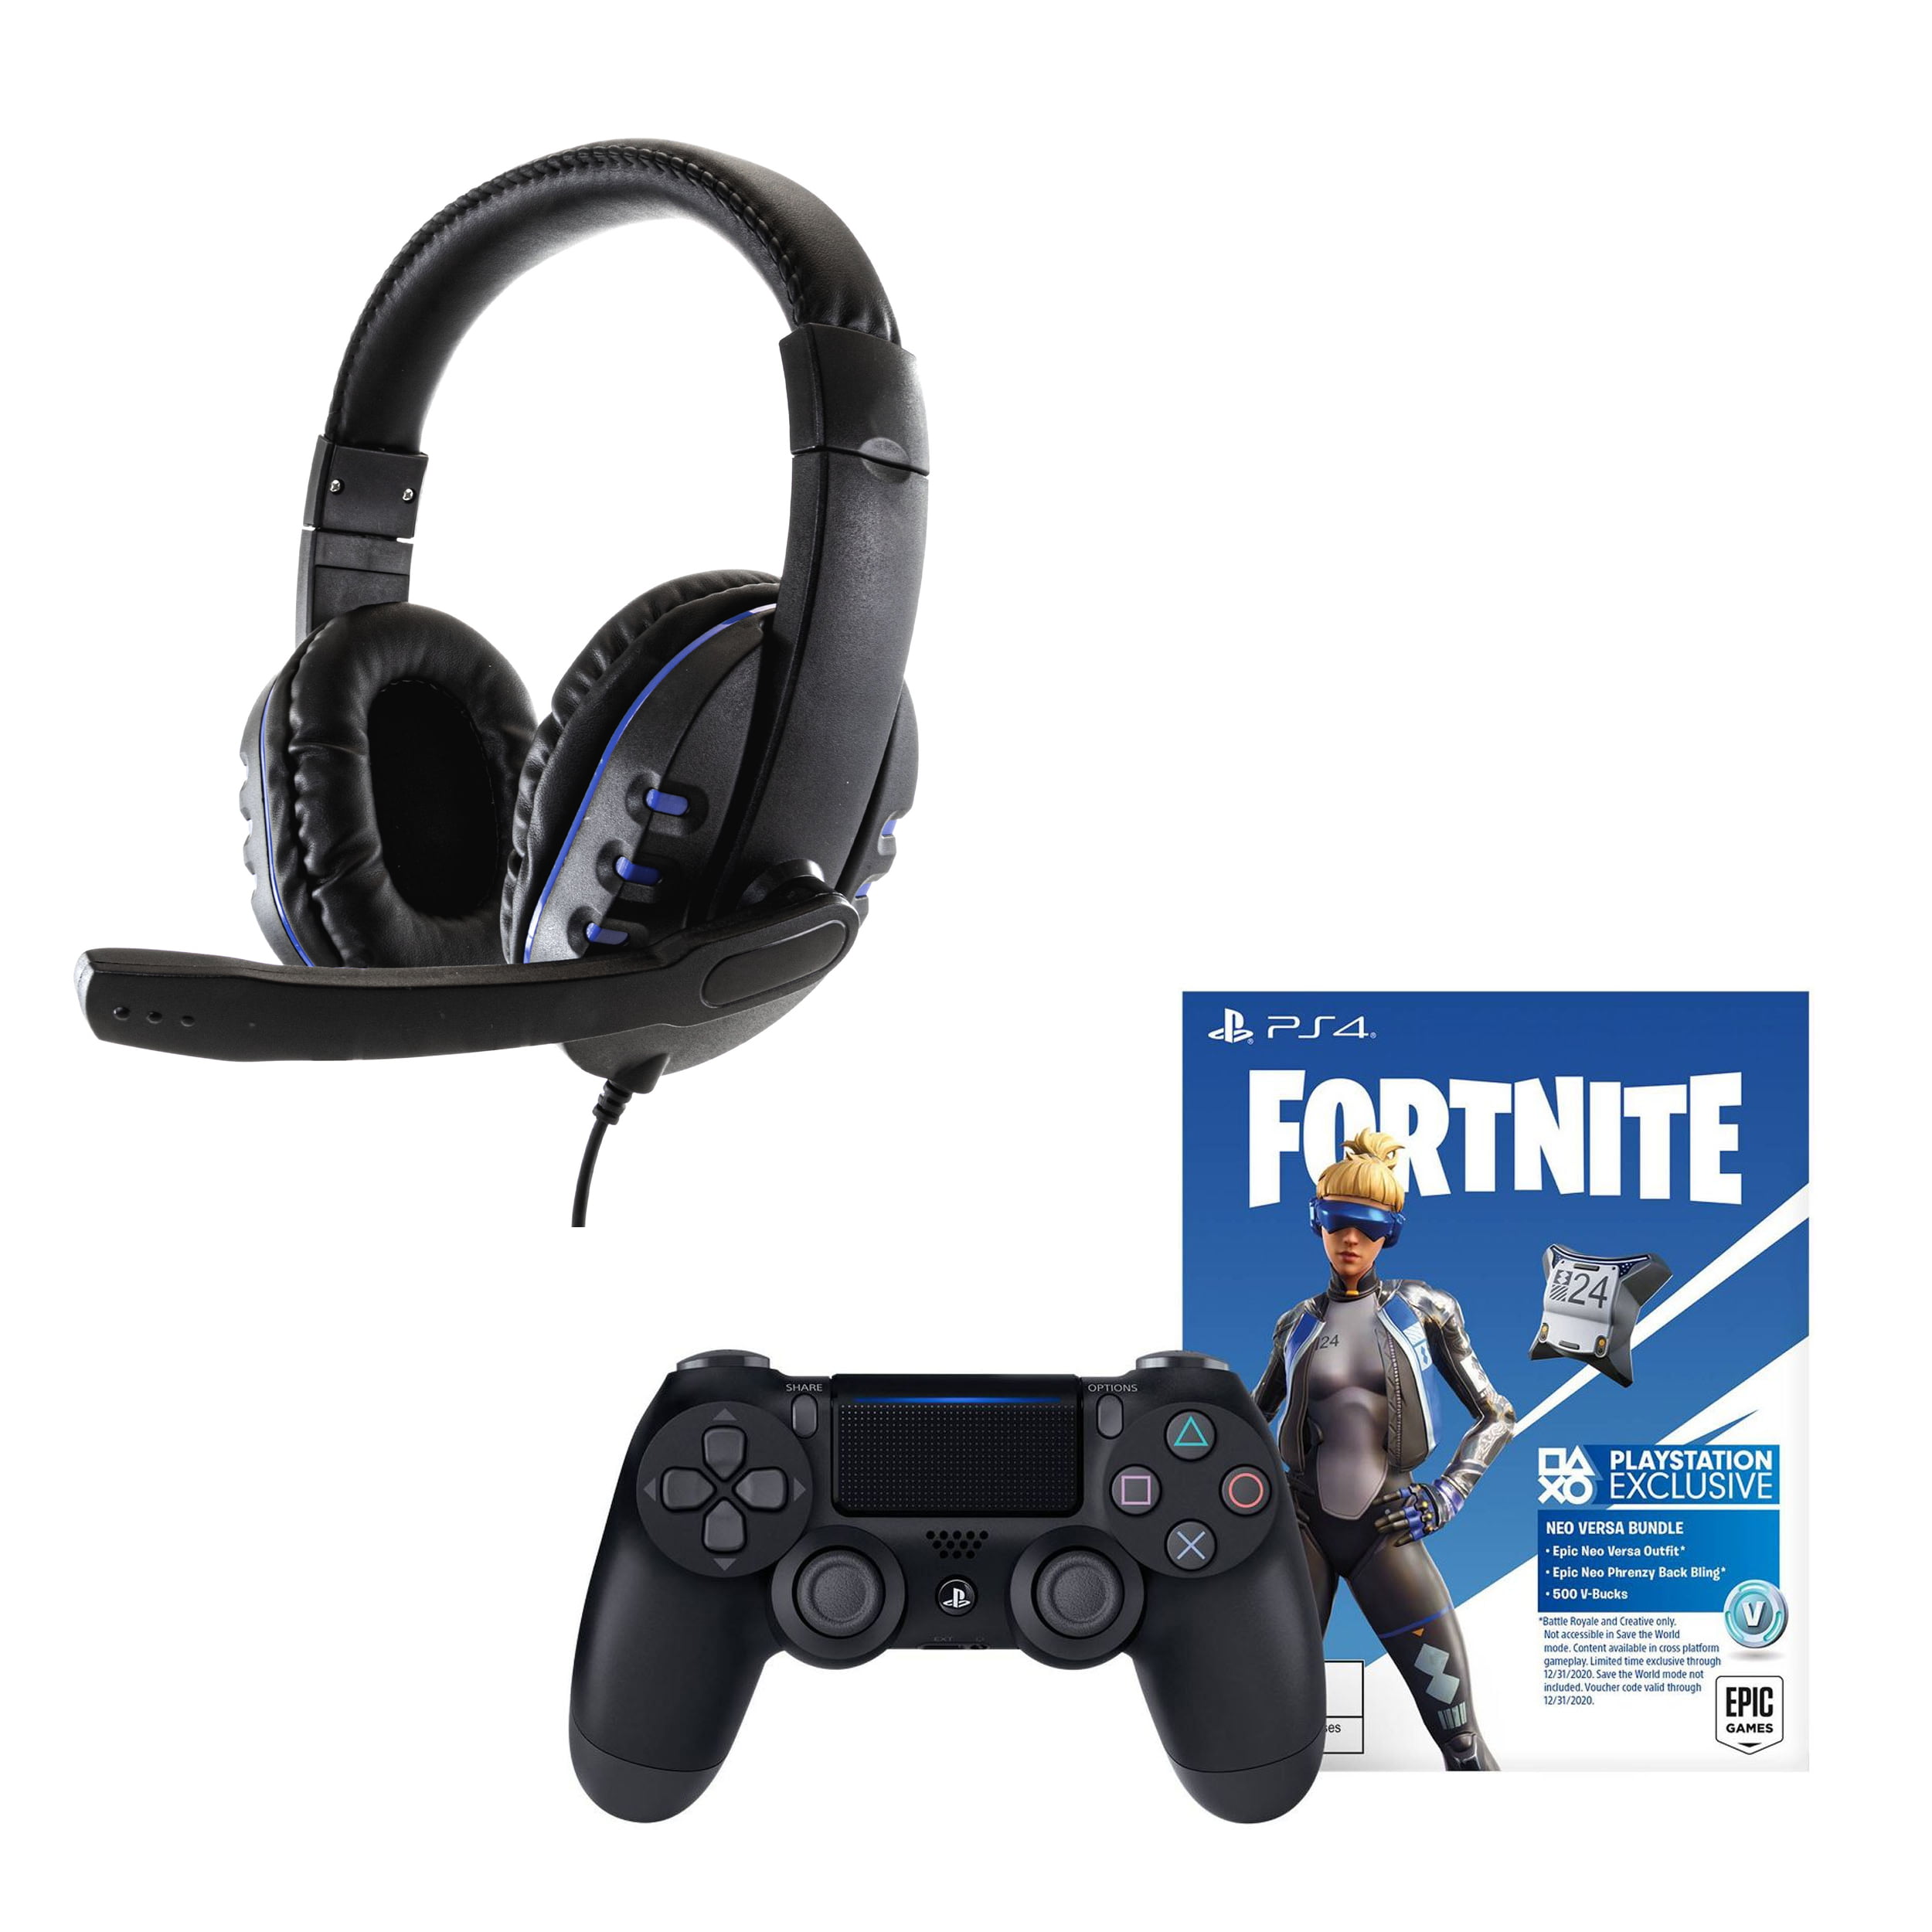 Fortnite Neo Versa 500GB PS4 Bundle with Second DualShock 4 Controller  (PS4) (PS4)